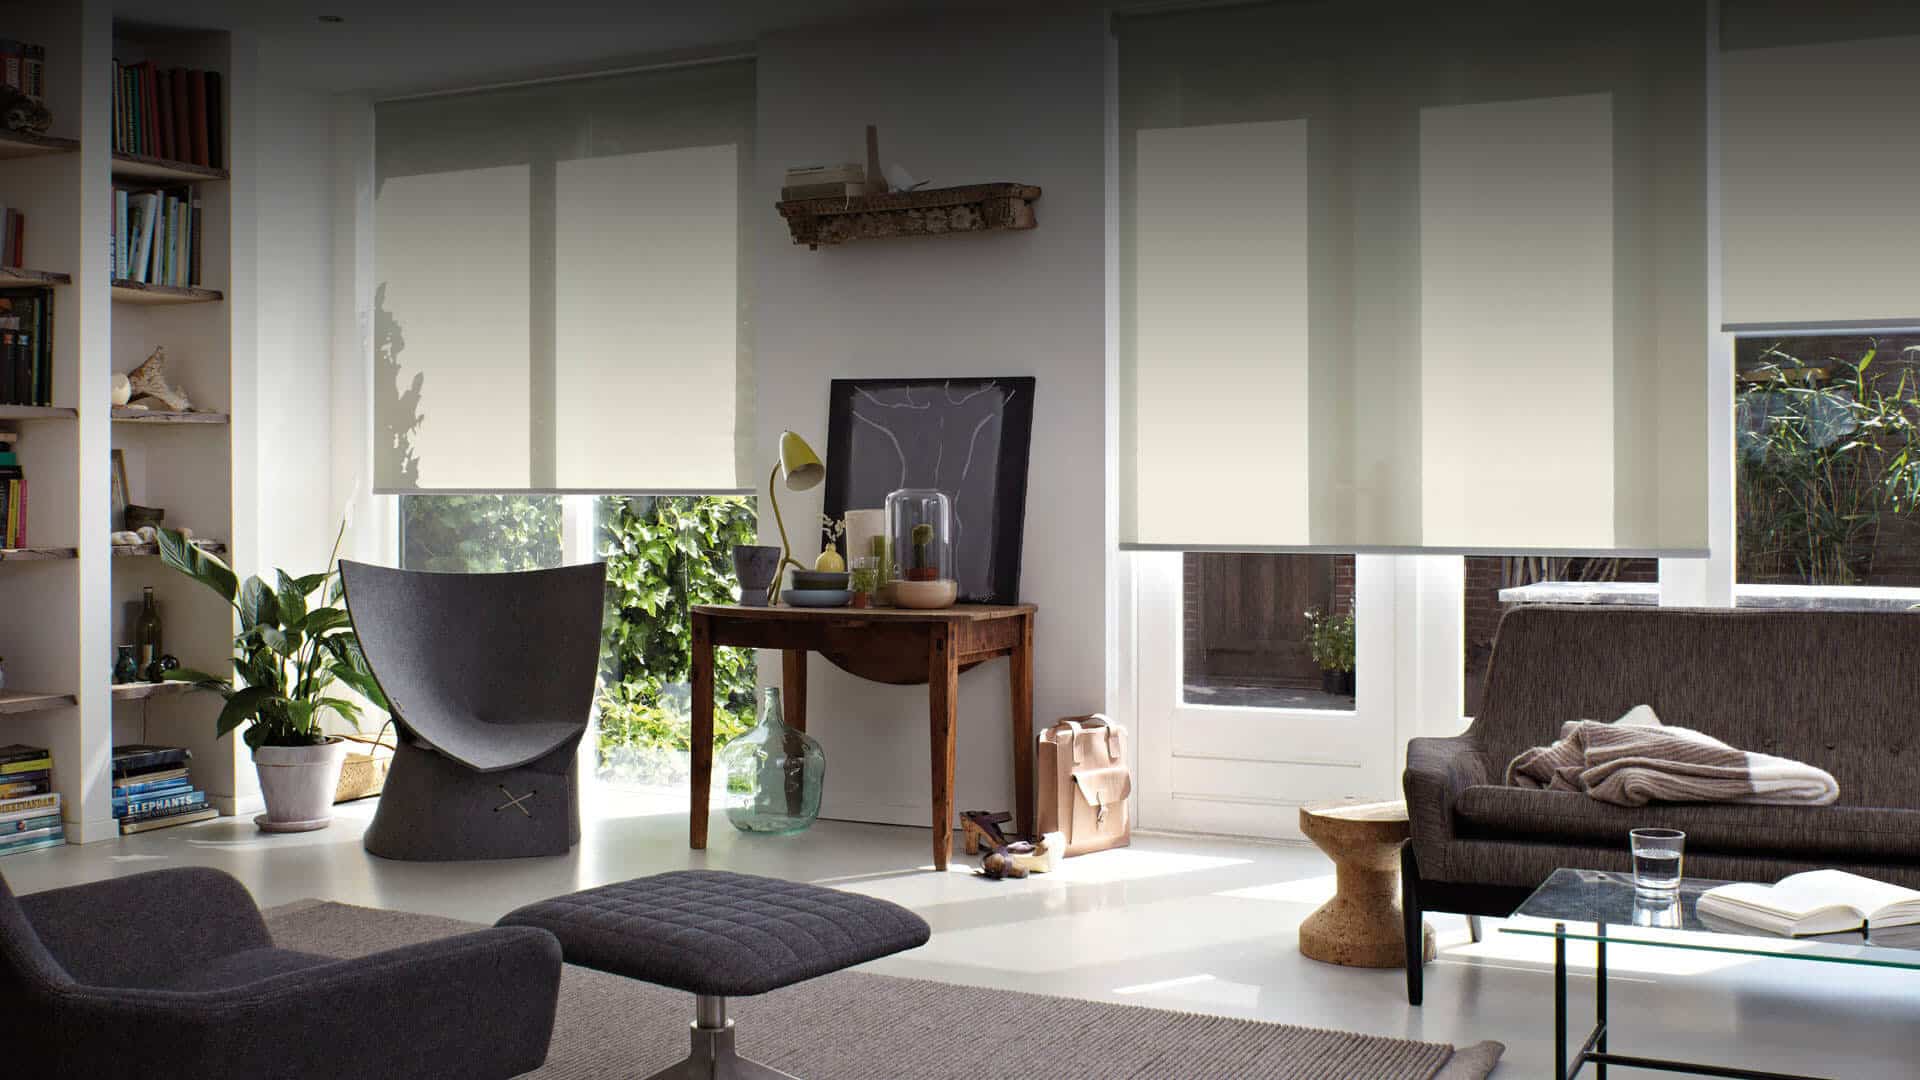 Beauty and Durability from Complete Blinds Sydney